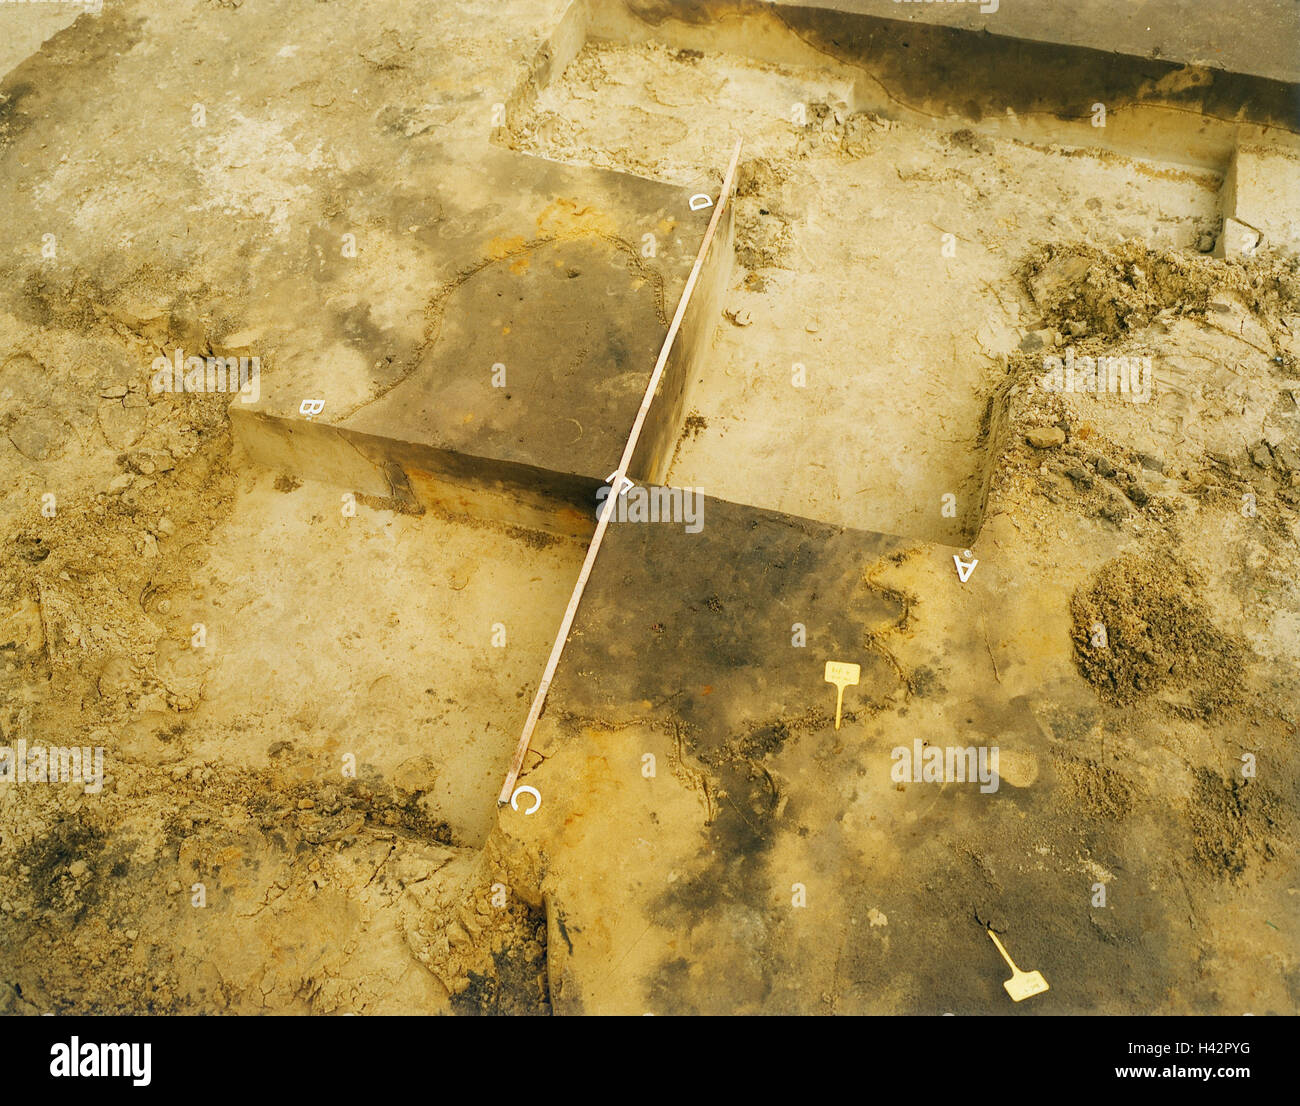 Germany, archeology, Kalkriese, Wiehengebirge, Varusschlacht, loamy soil, Battle of the Teutoburg Forest, Clades Variana, Varian disaster, Arminius, Hermann, excavation site, discovery, research, excavation, science, elevated view, sand, bird's-eye view, Stock Photo